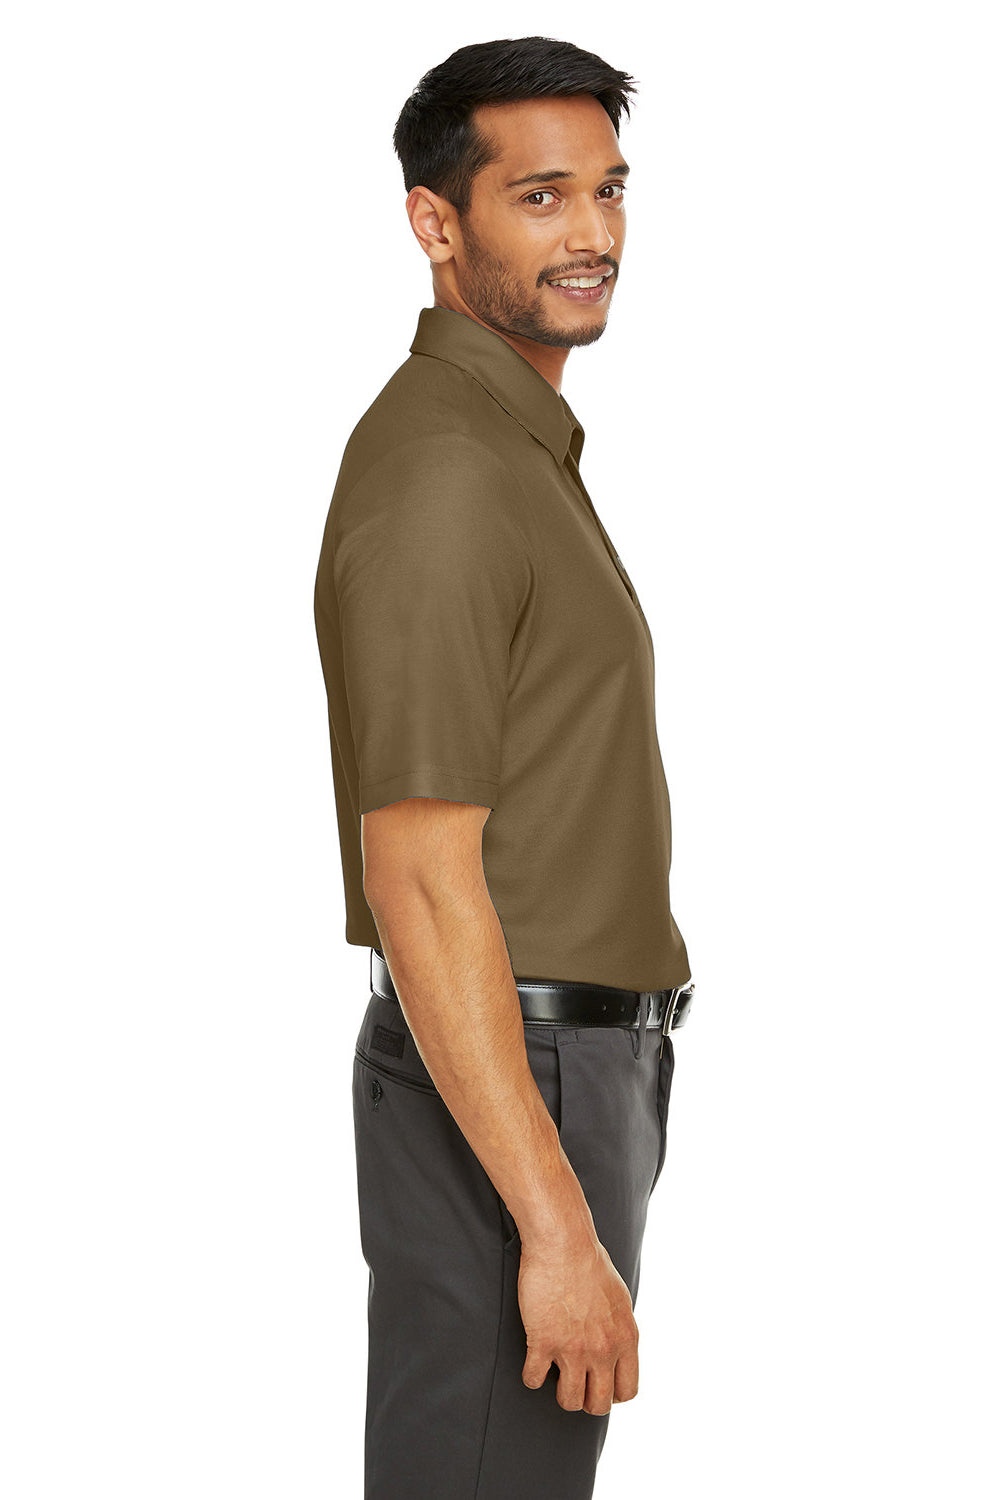 Core 365 CE112 Mens Fusion ChromaSoft Performance Moisture Wicking Short Sleeve Polo Shirt Coyote Brown Side